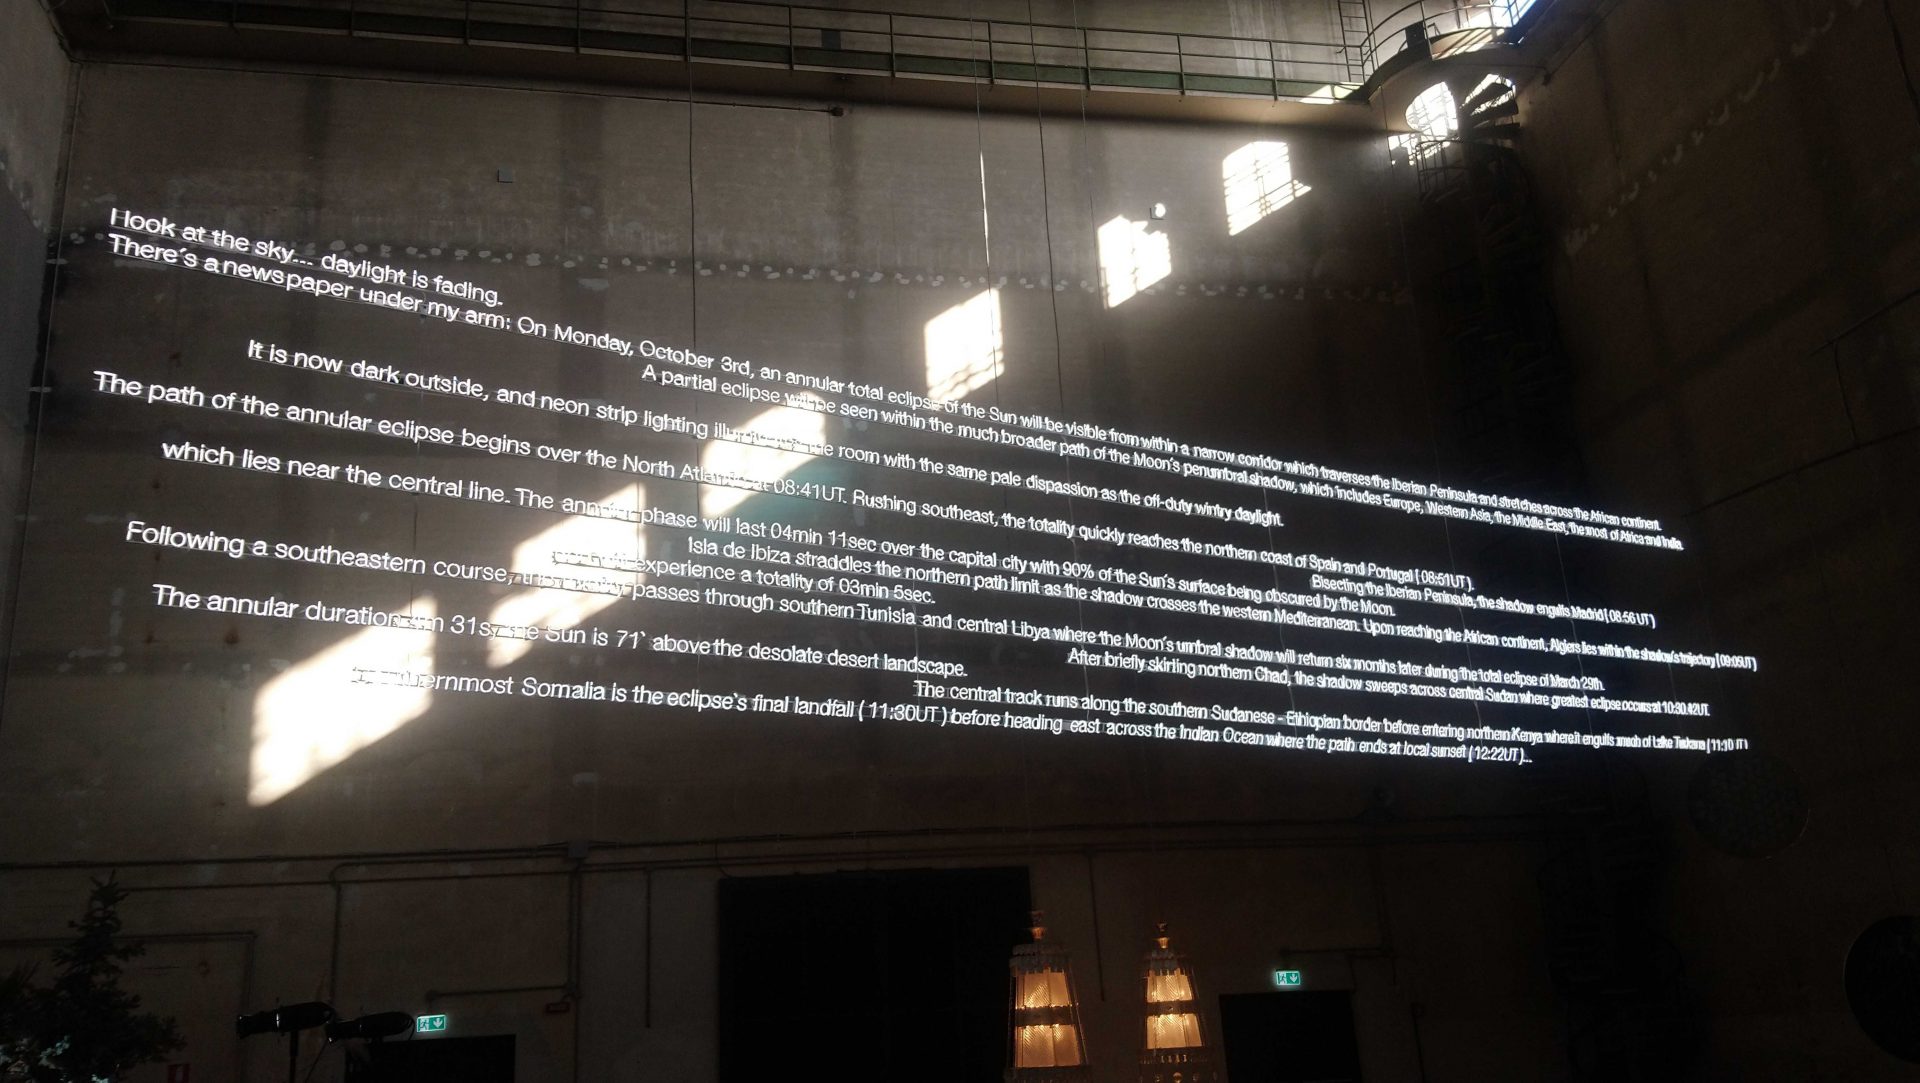 Cerith Wyn Evans placed a giant neon text